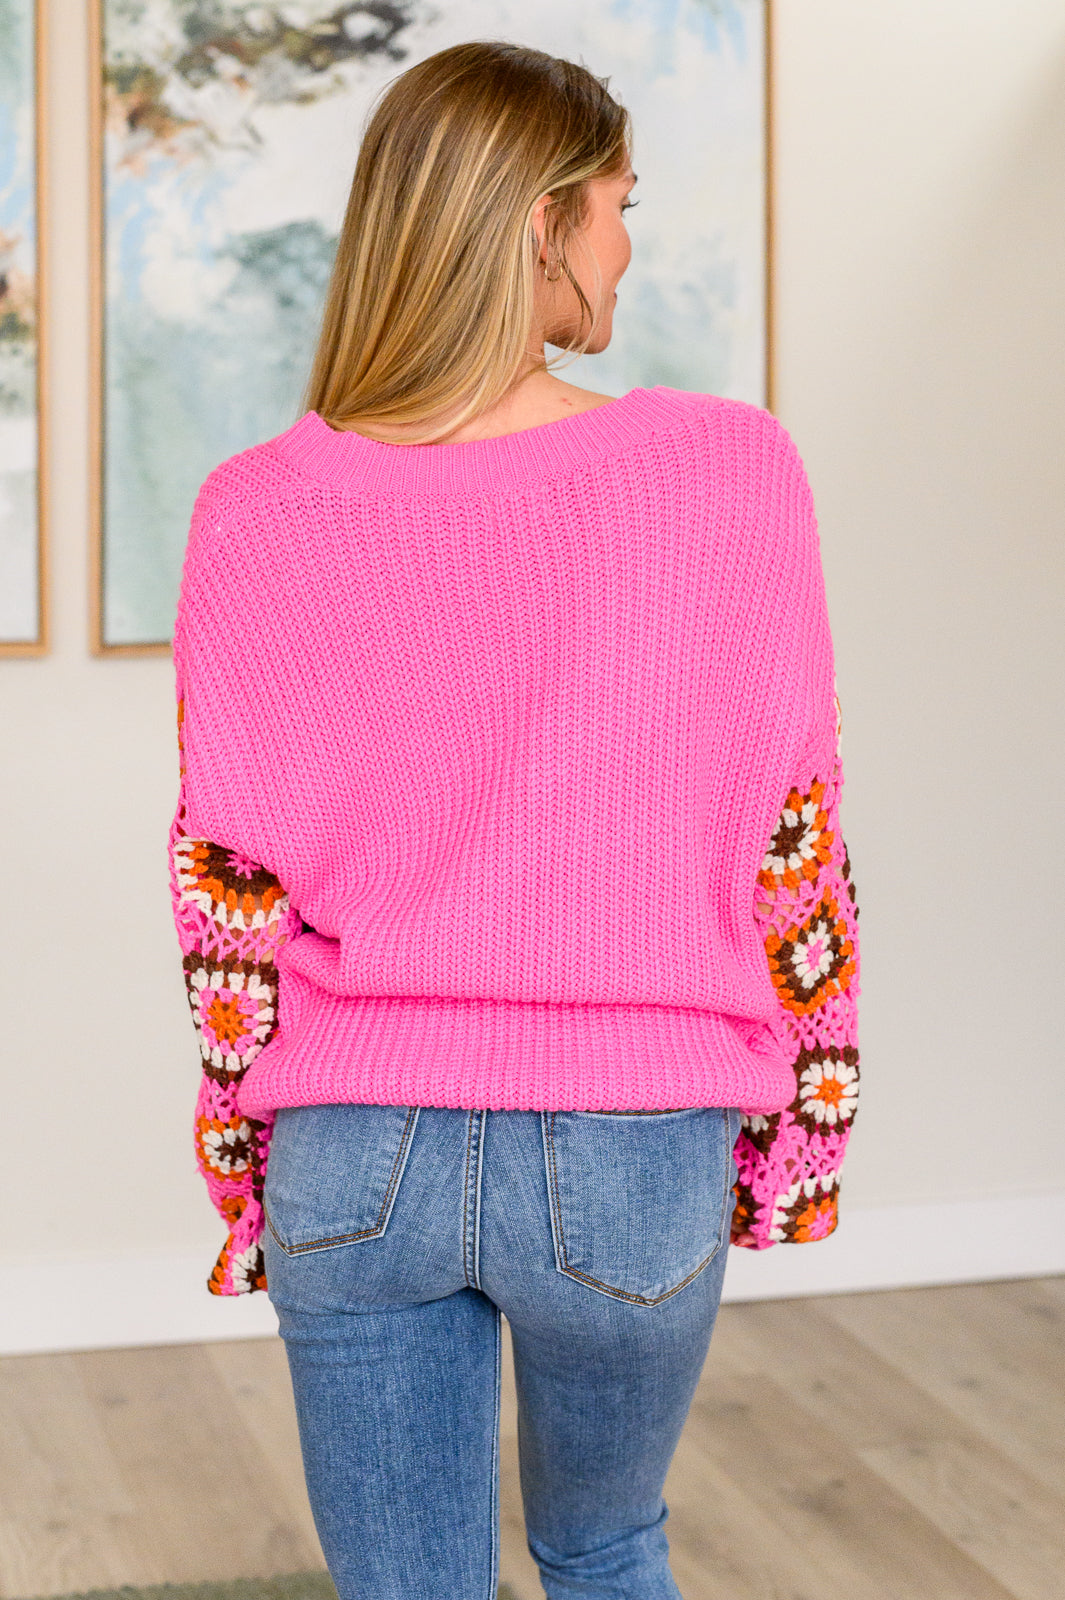 Can't Stop this Feeling V-Neck Knit Sweater Tops Ave Shops   